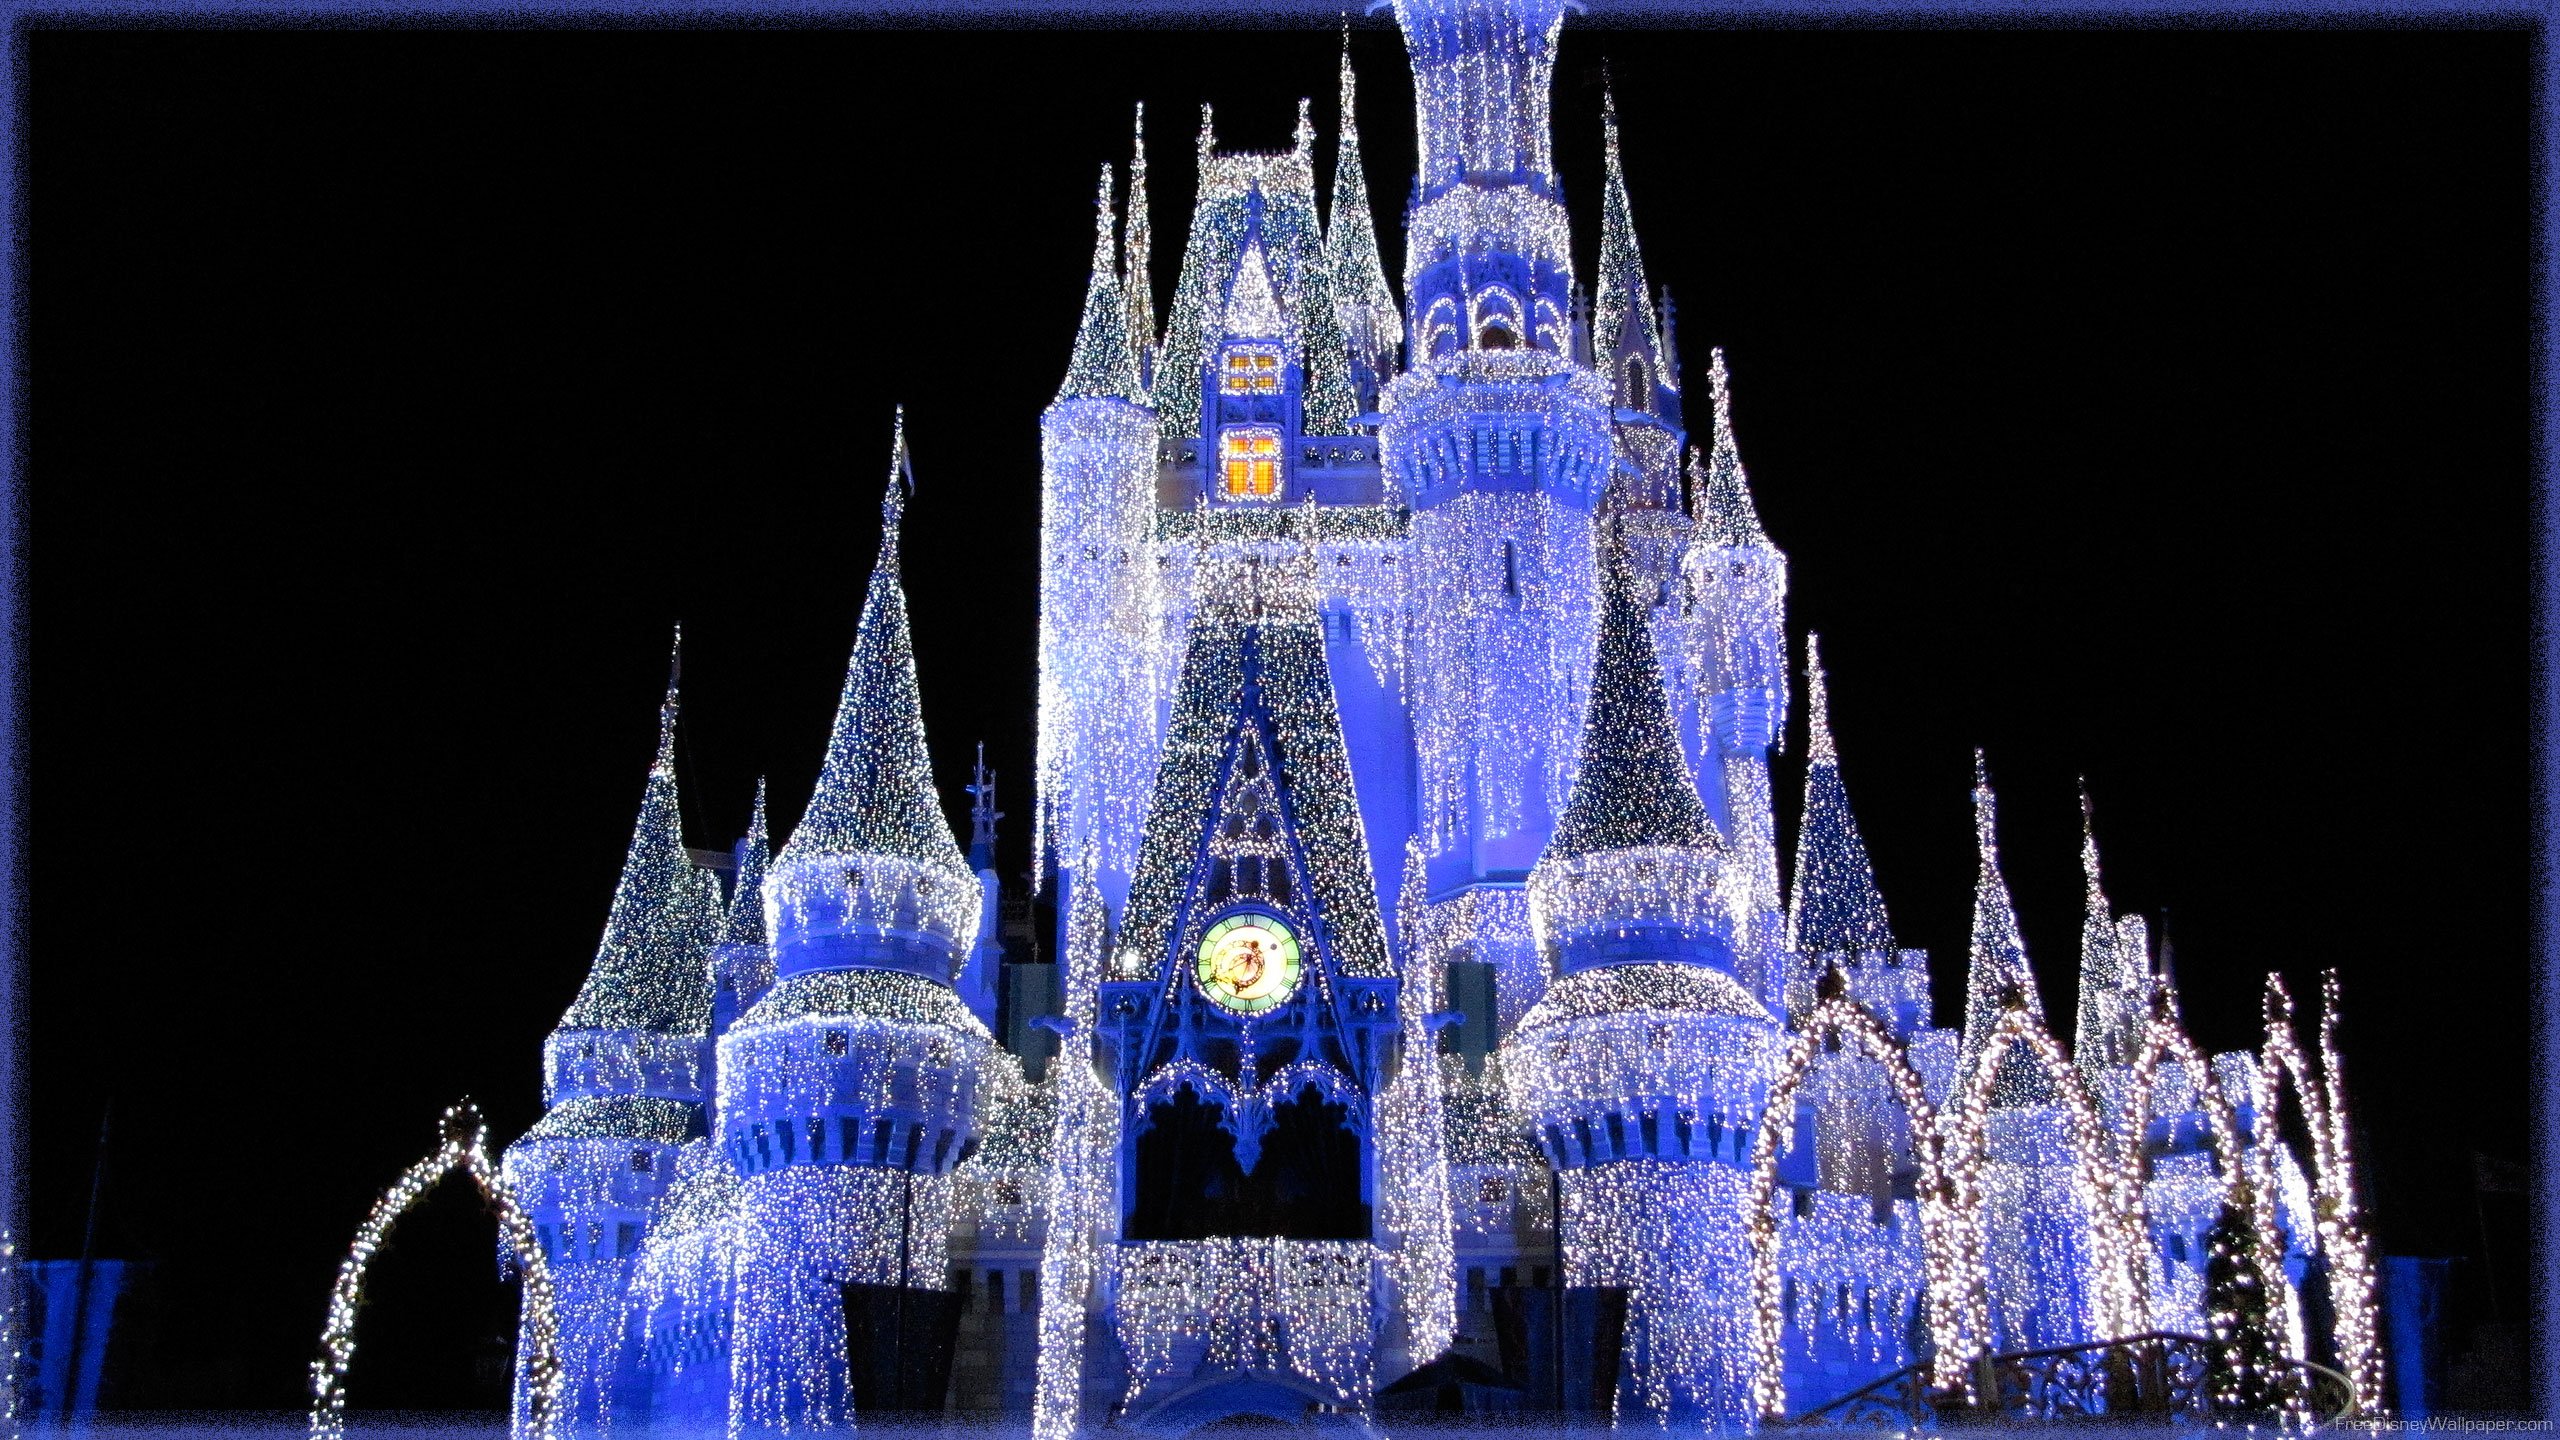 Disney Castle Wallpaper Images amp Pictures   Becuo